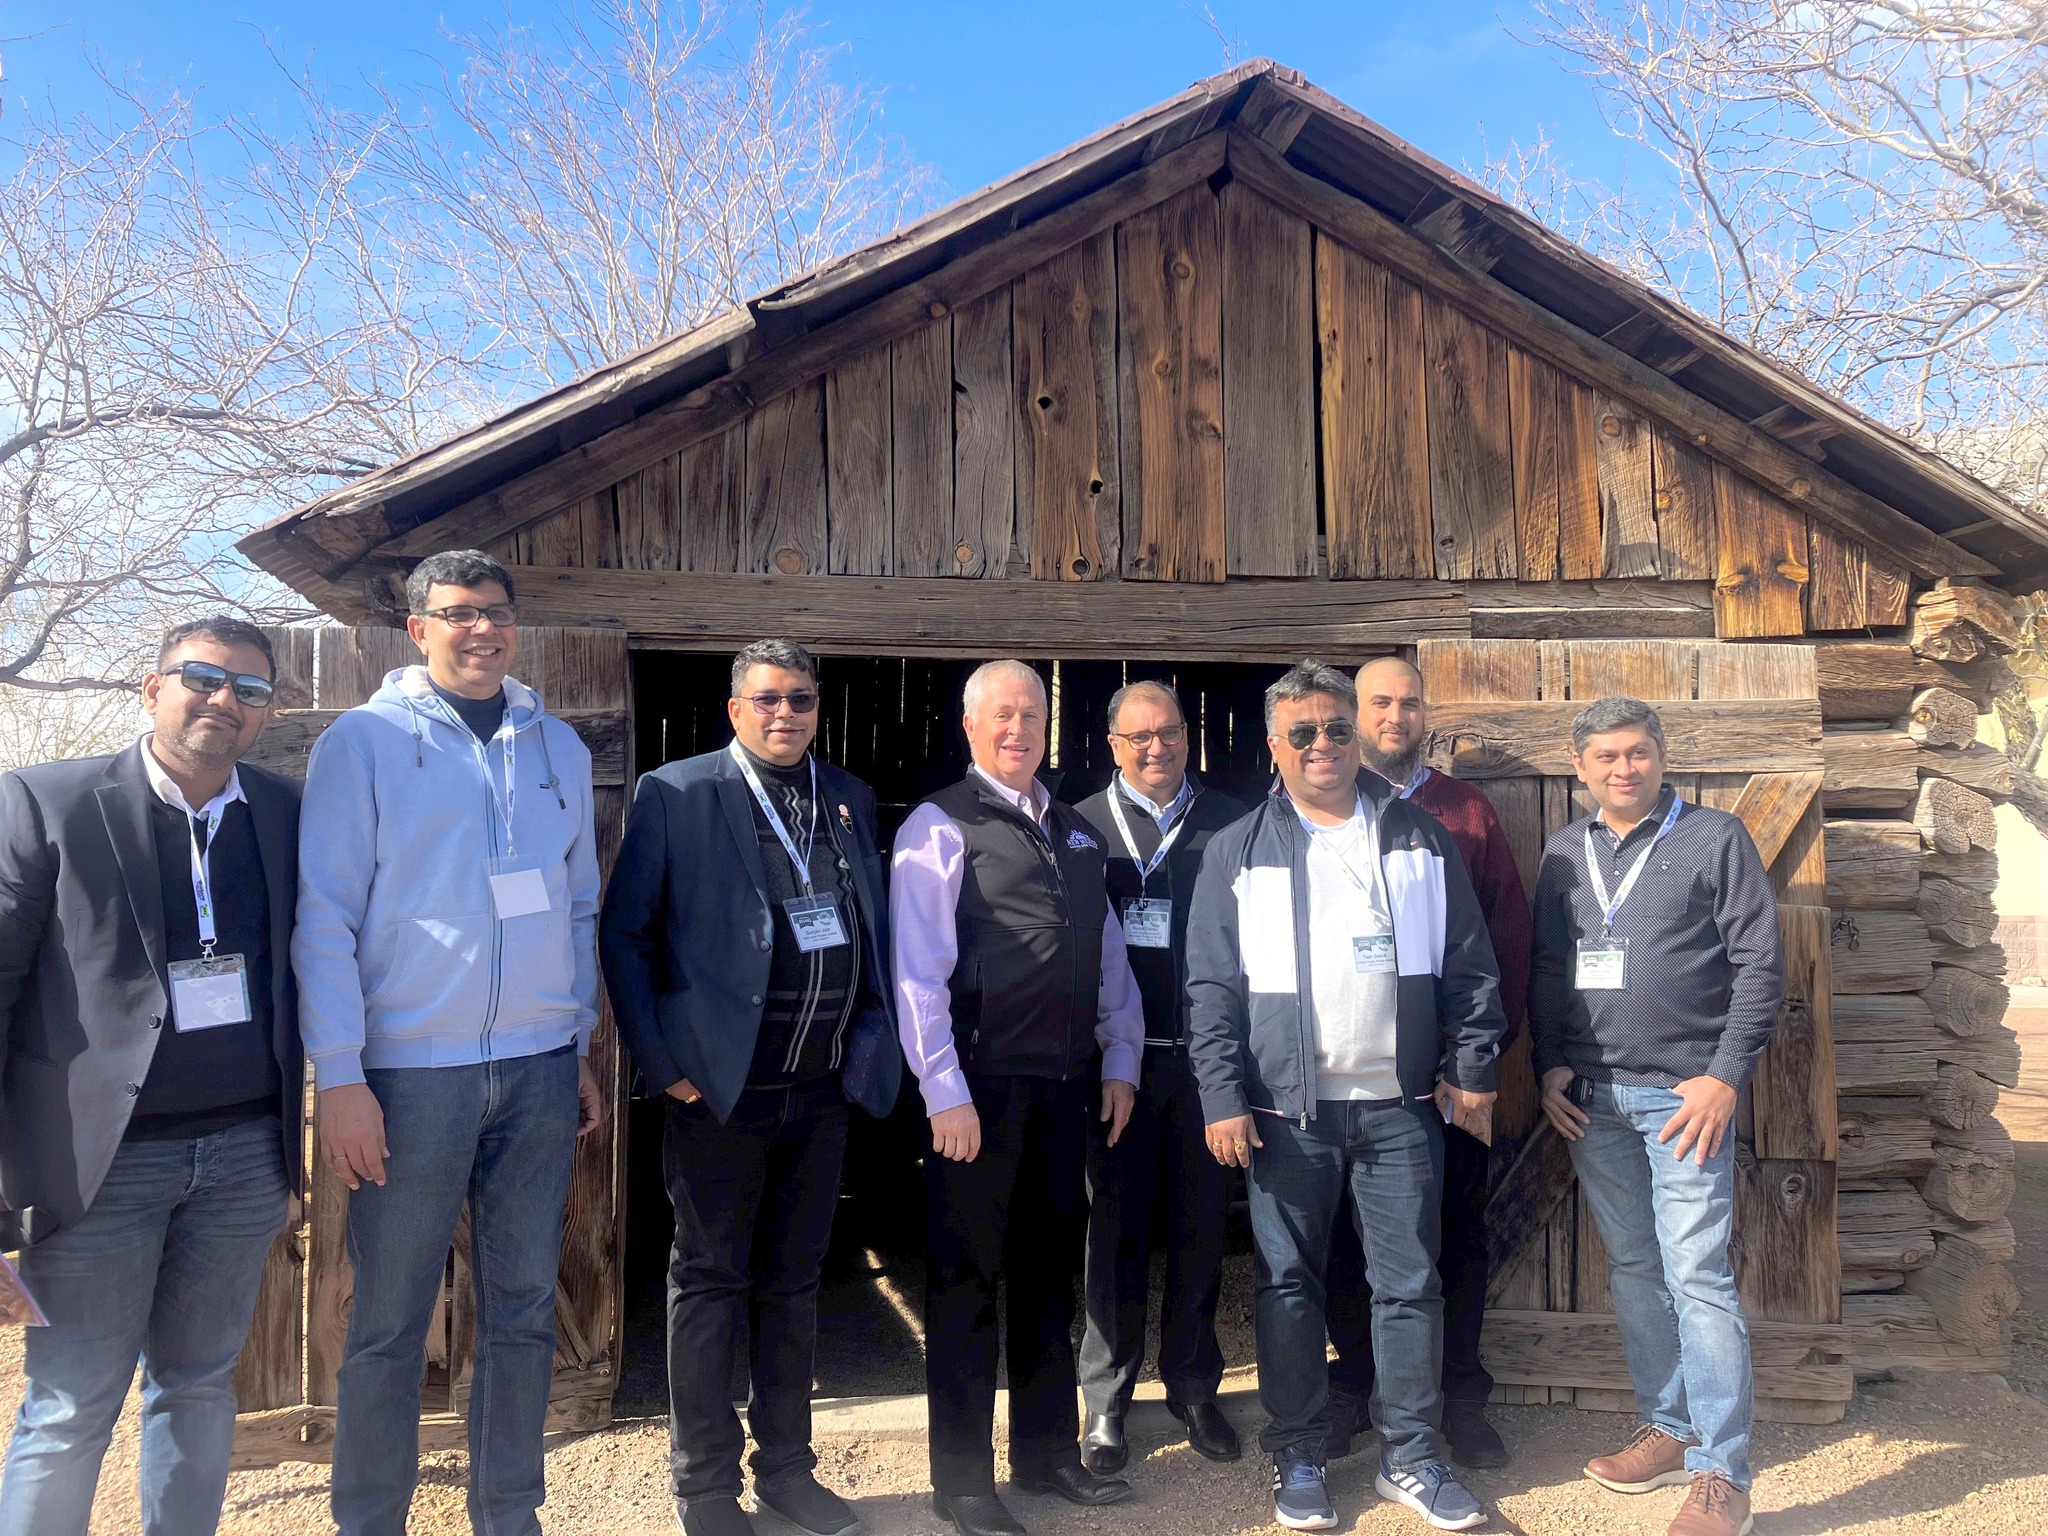 Group of eight men standing in front of an old log cabin.